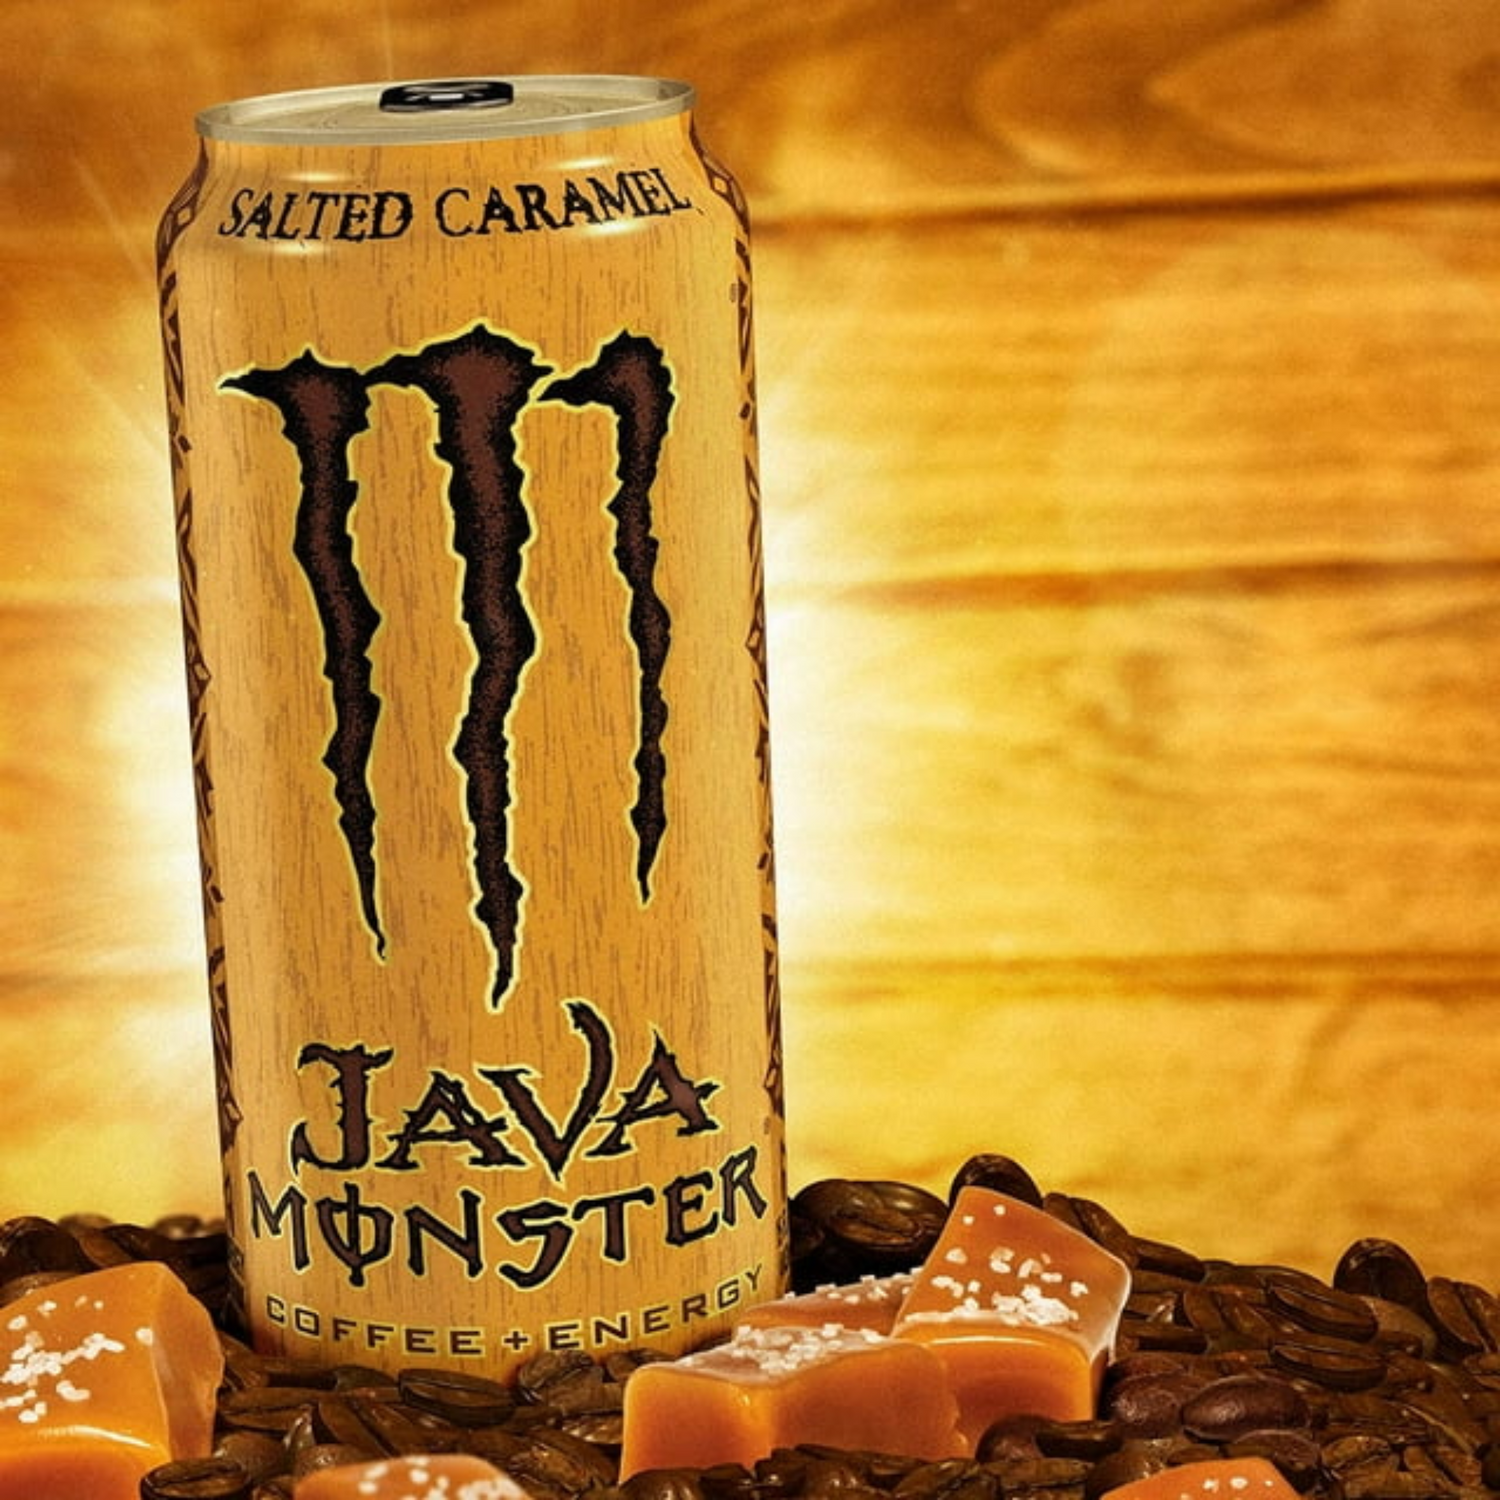 Java Monster Salted Caramel, Coffee + Energy, 15 fl oz 12 Cans